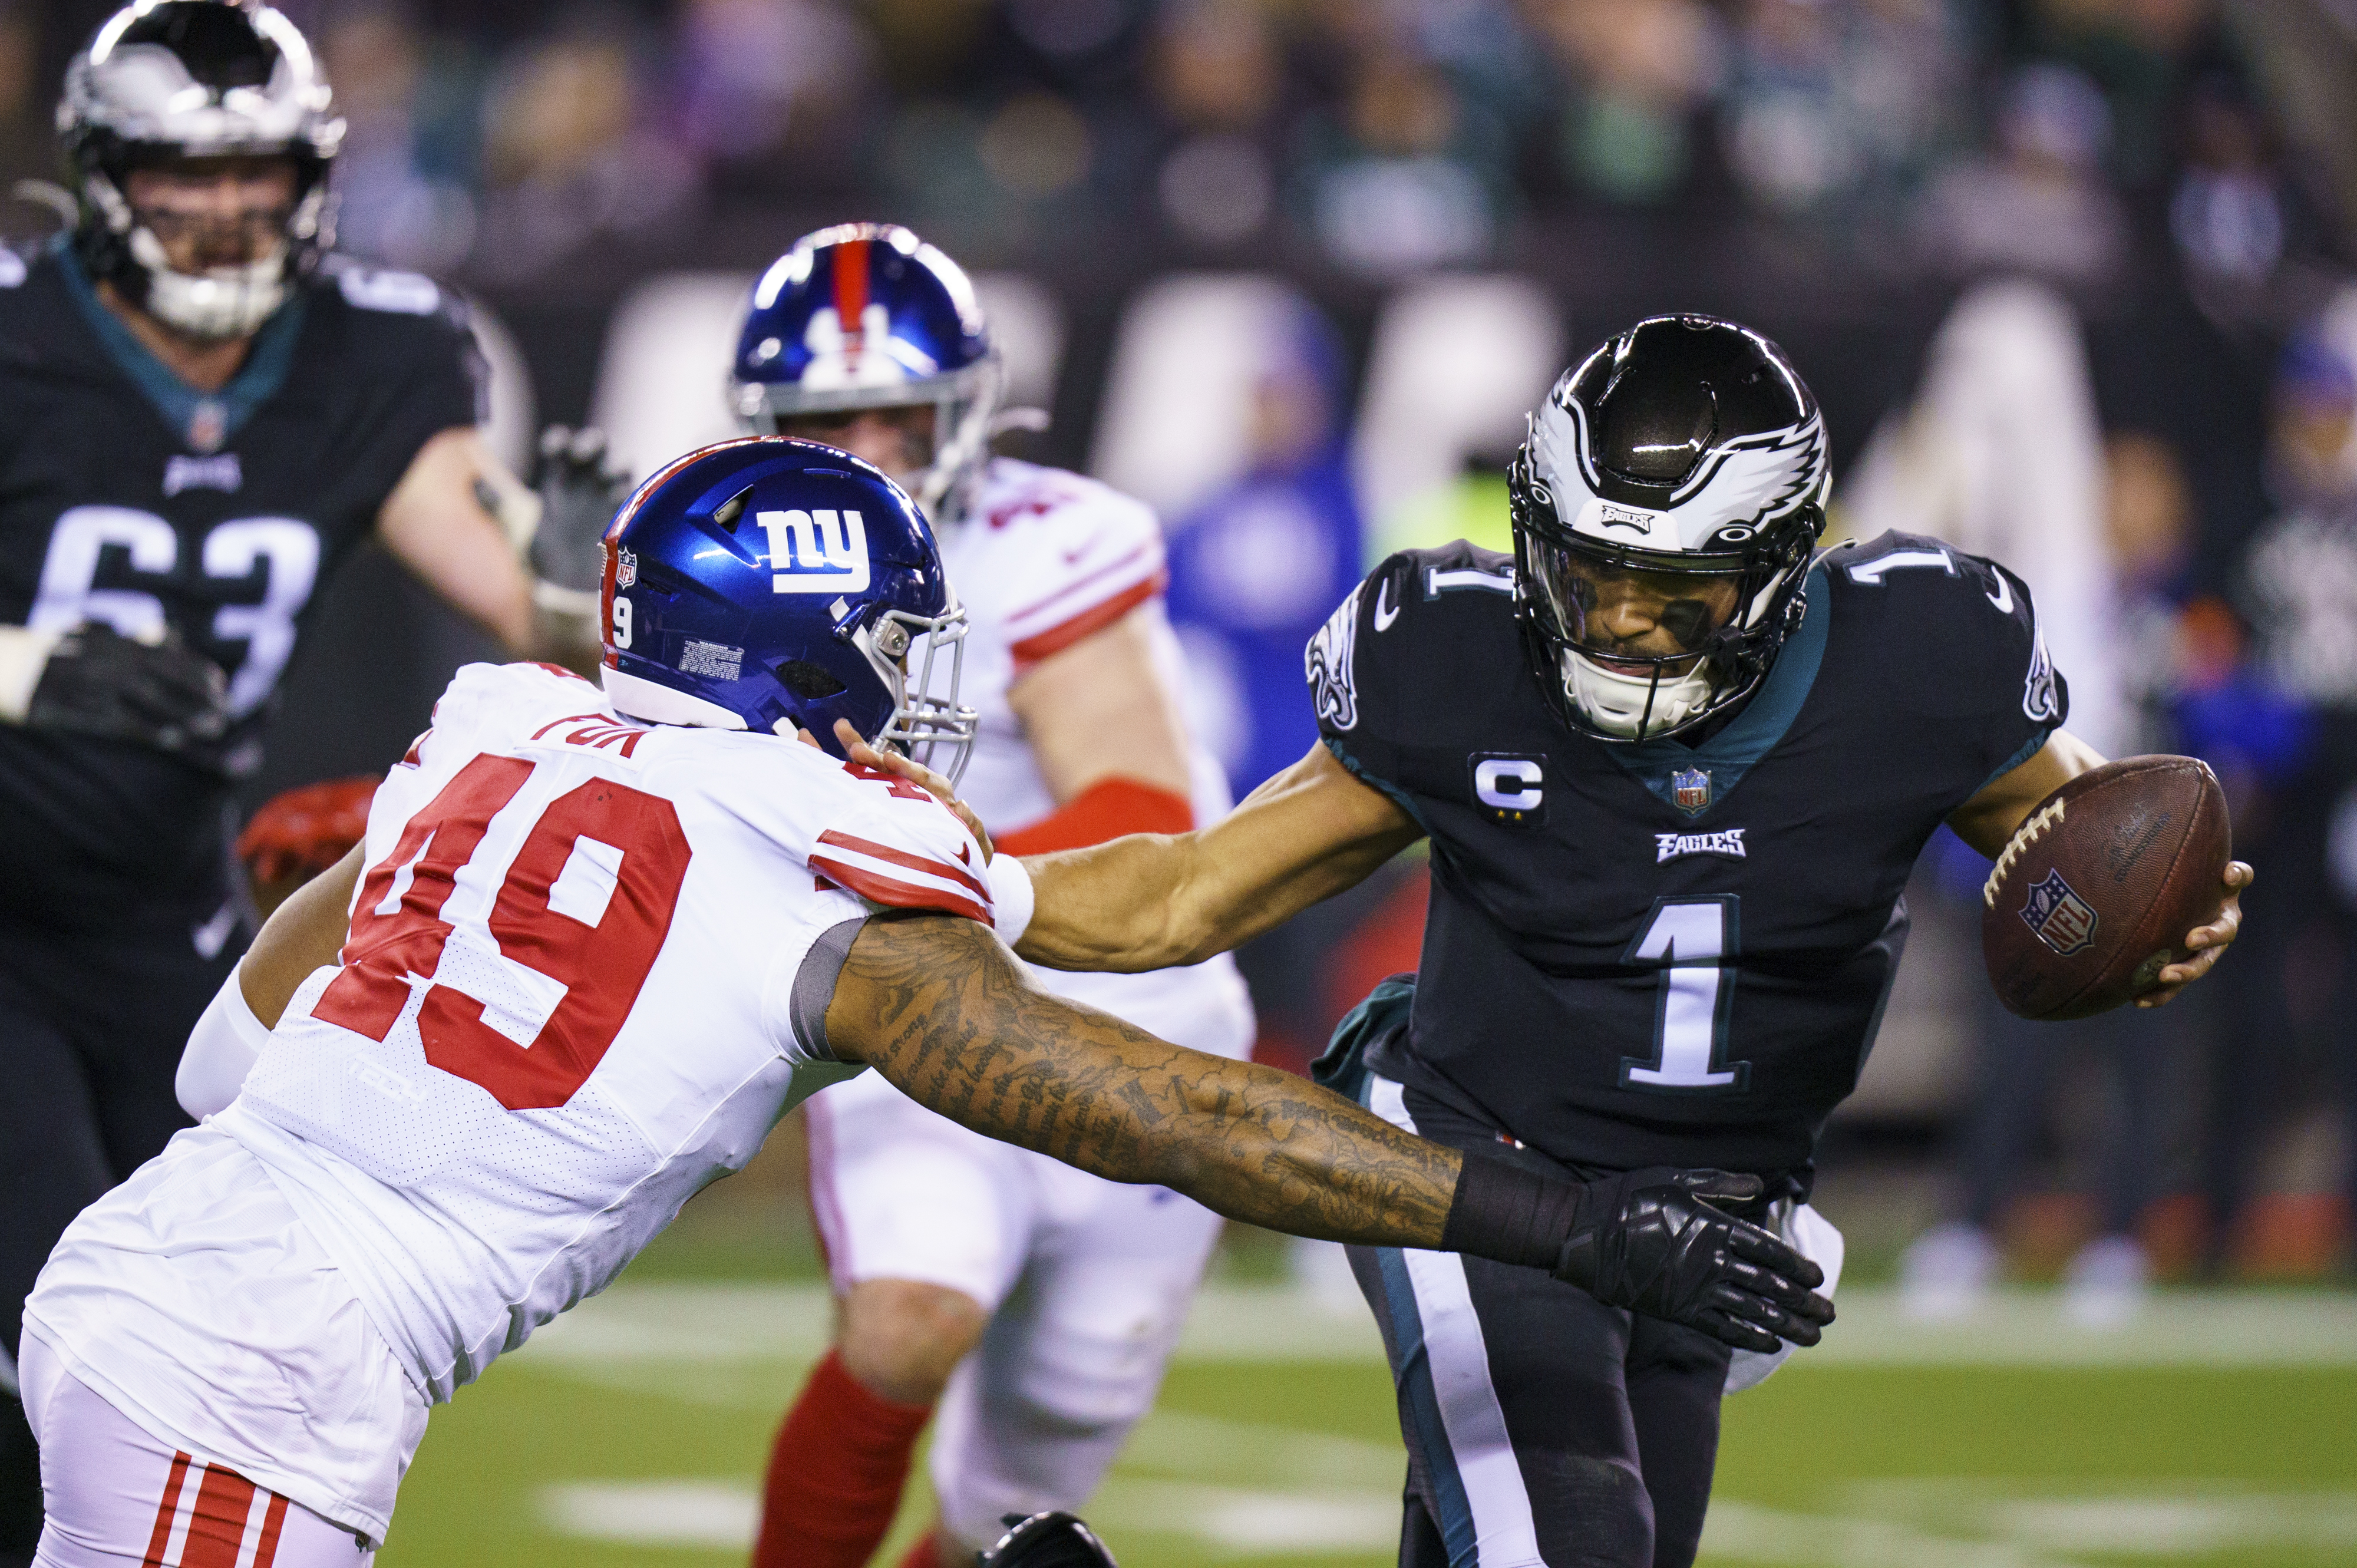 Eagles clinch the NFC East after 22-16 win over the Giants in Week 18